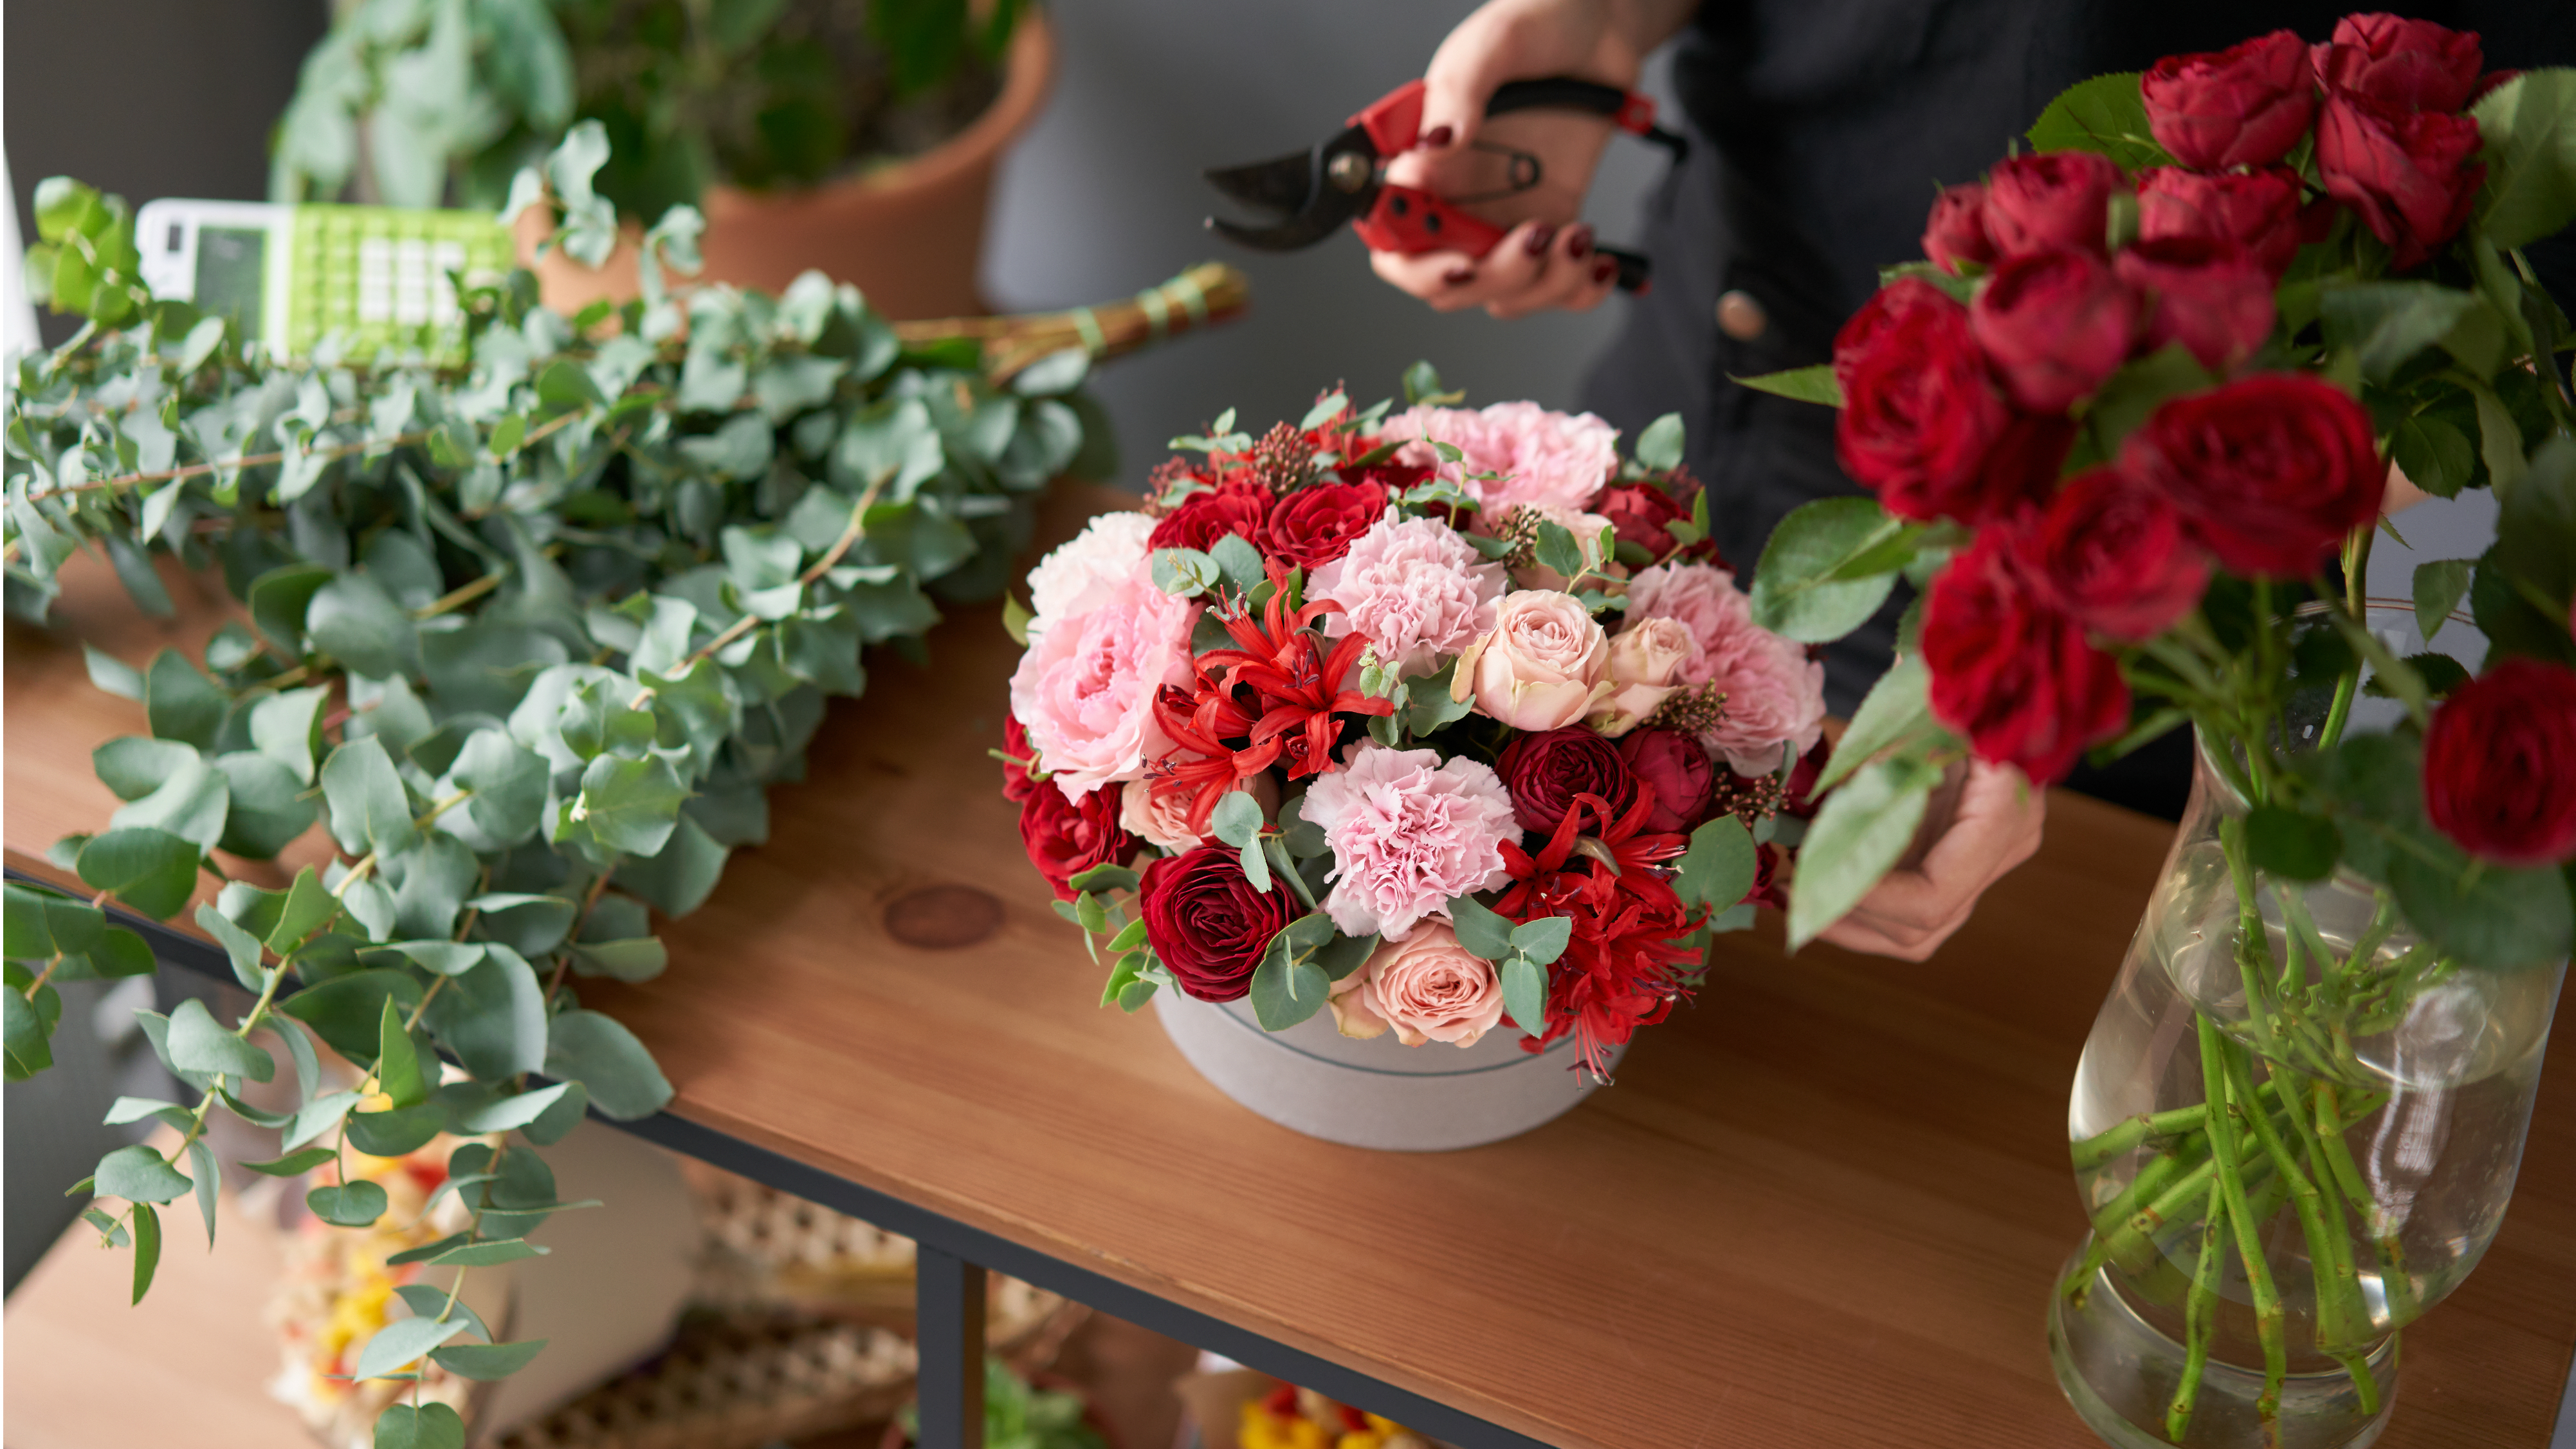 Visit an Online Florist When You Want the Perfect Gift